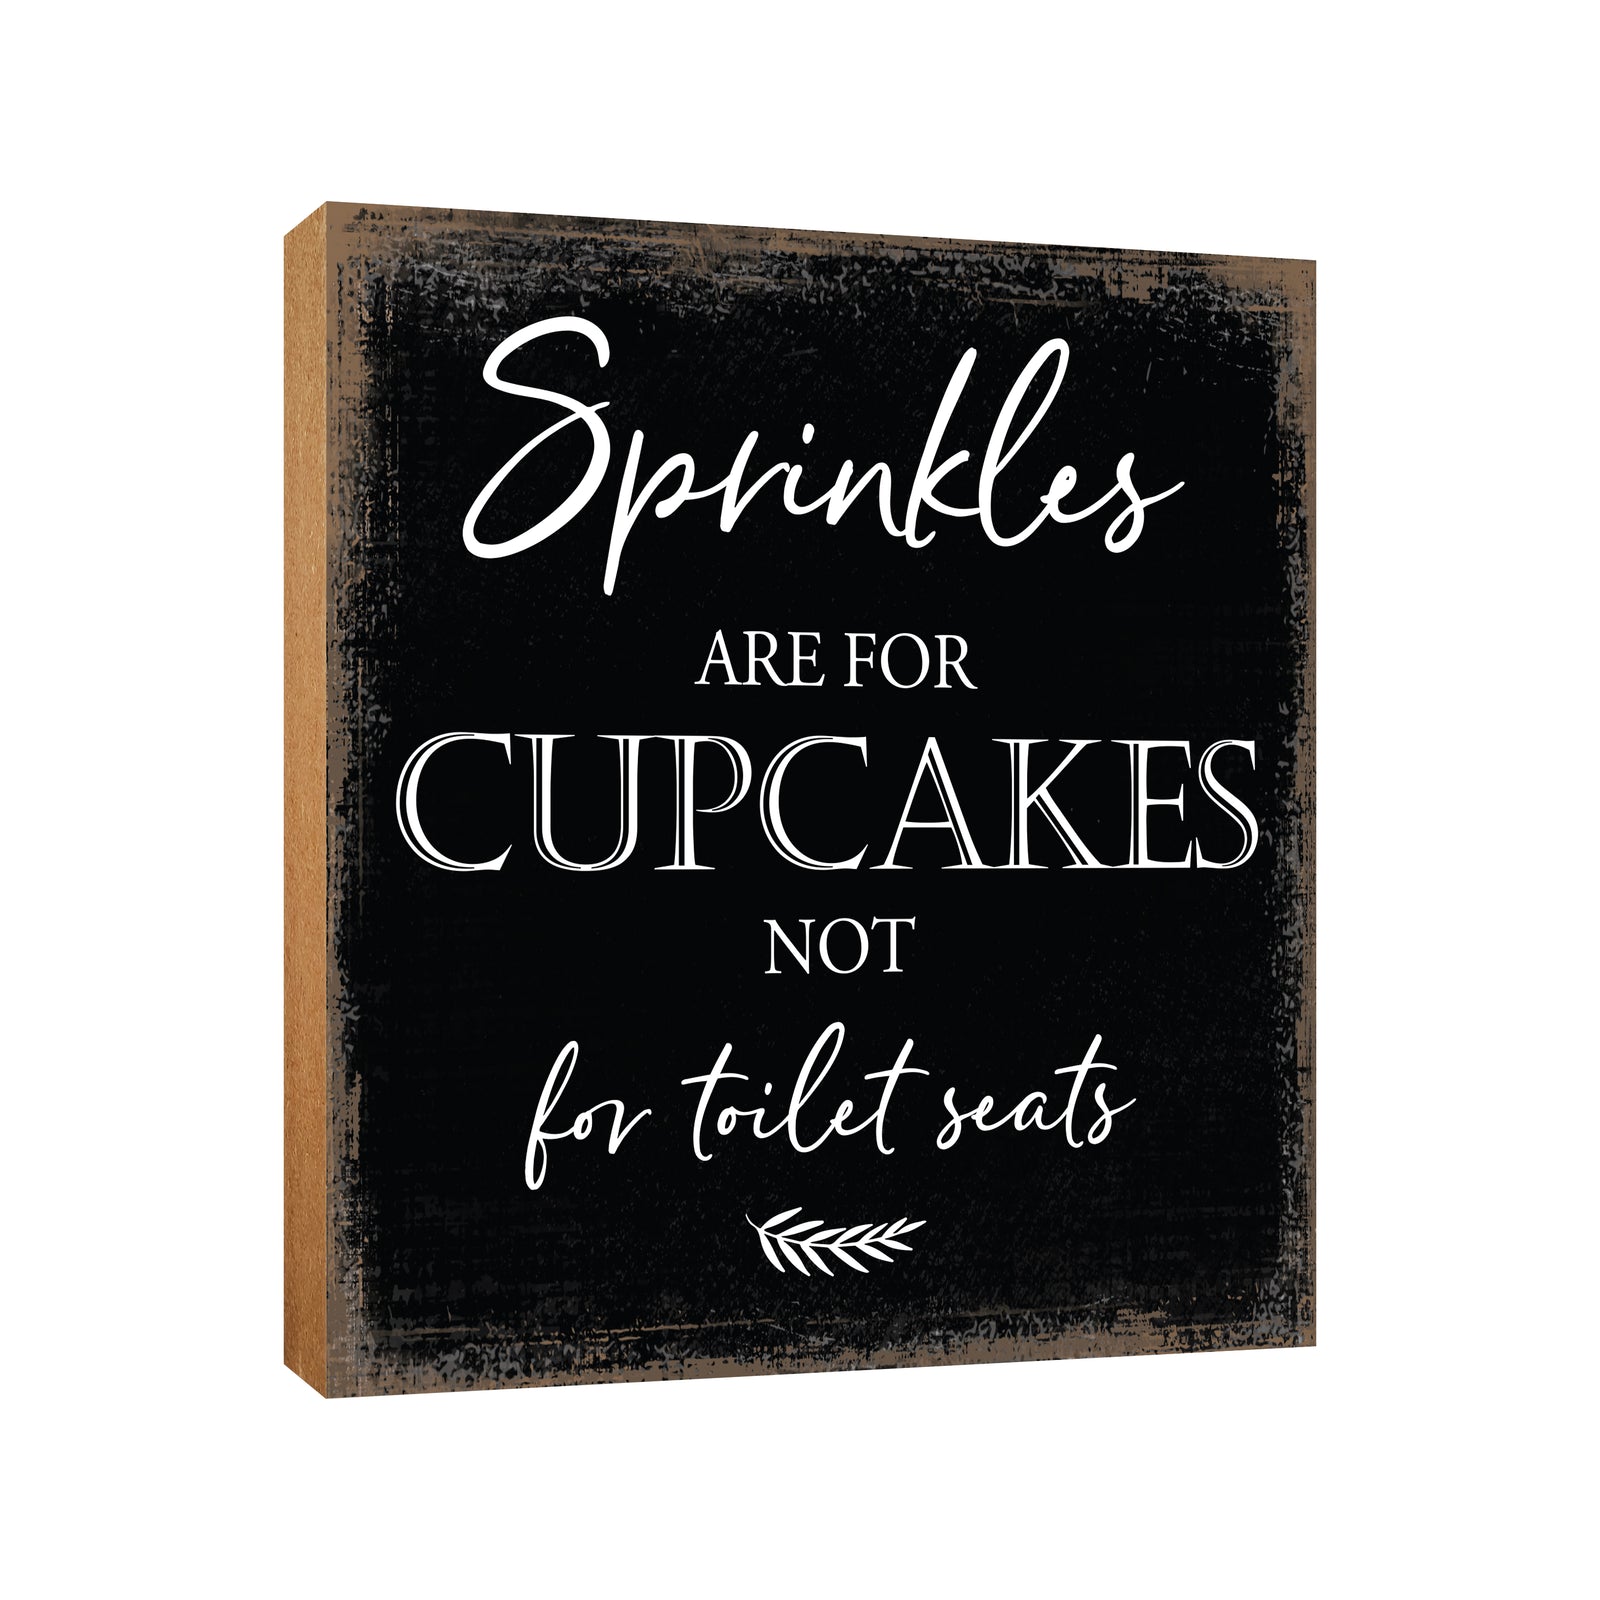 Wooden BATHROOM 6x6 Block shelf decor (Sprinkles Are For Cupcakes) Inspirational Plaque Tabletop and Family Home Decoration